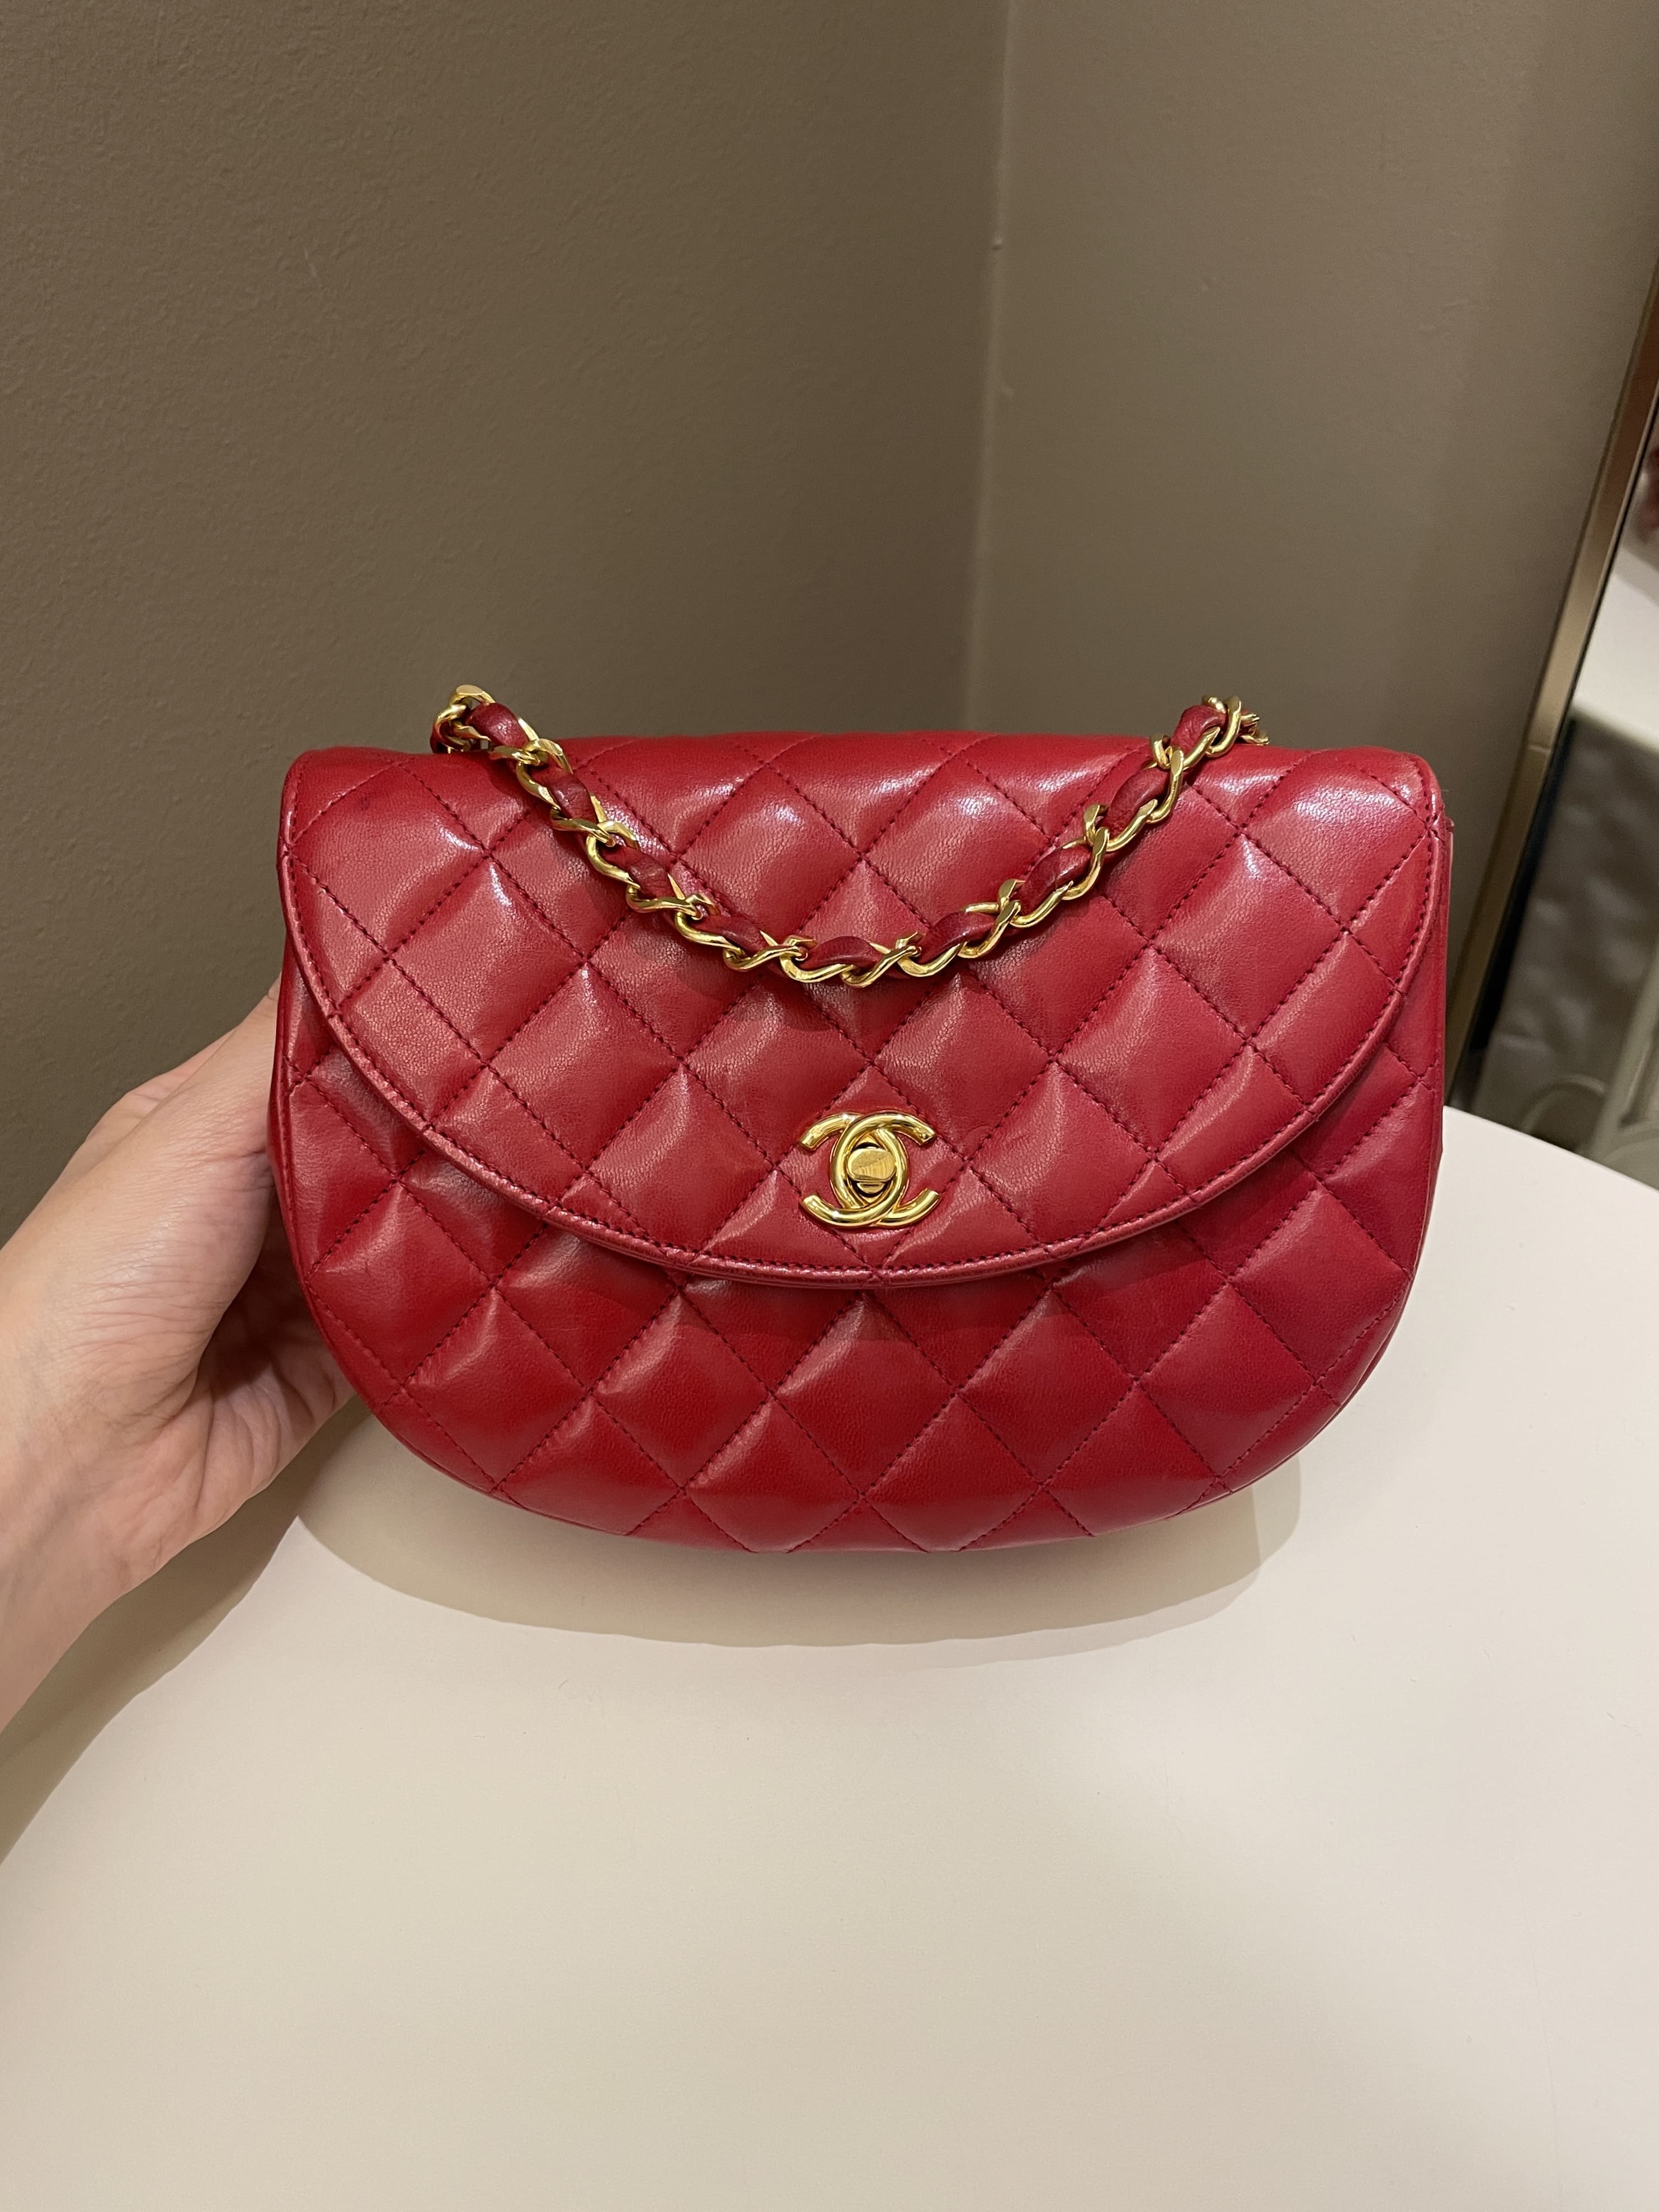 Chanel Vintage Quilted Cc Curve Bag Red Lambskin – ＬＯＶＥＬＯＴＳＬＵＸＵＲＹ